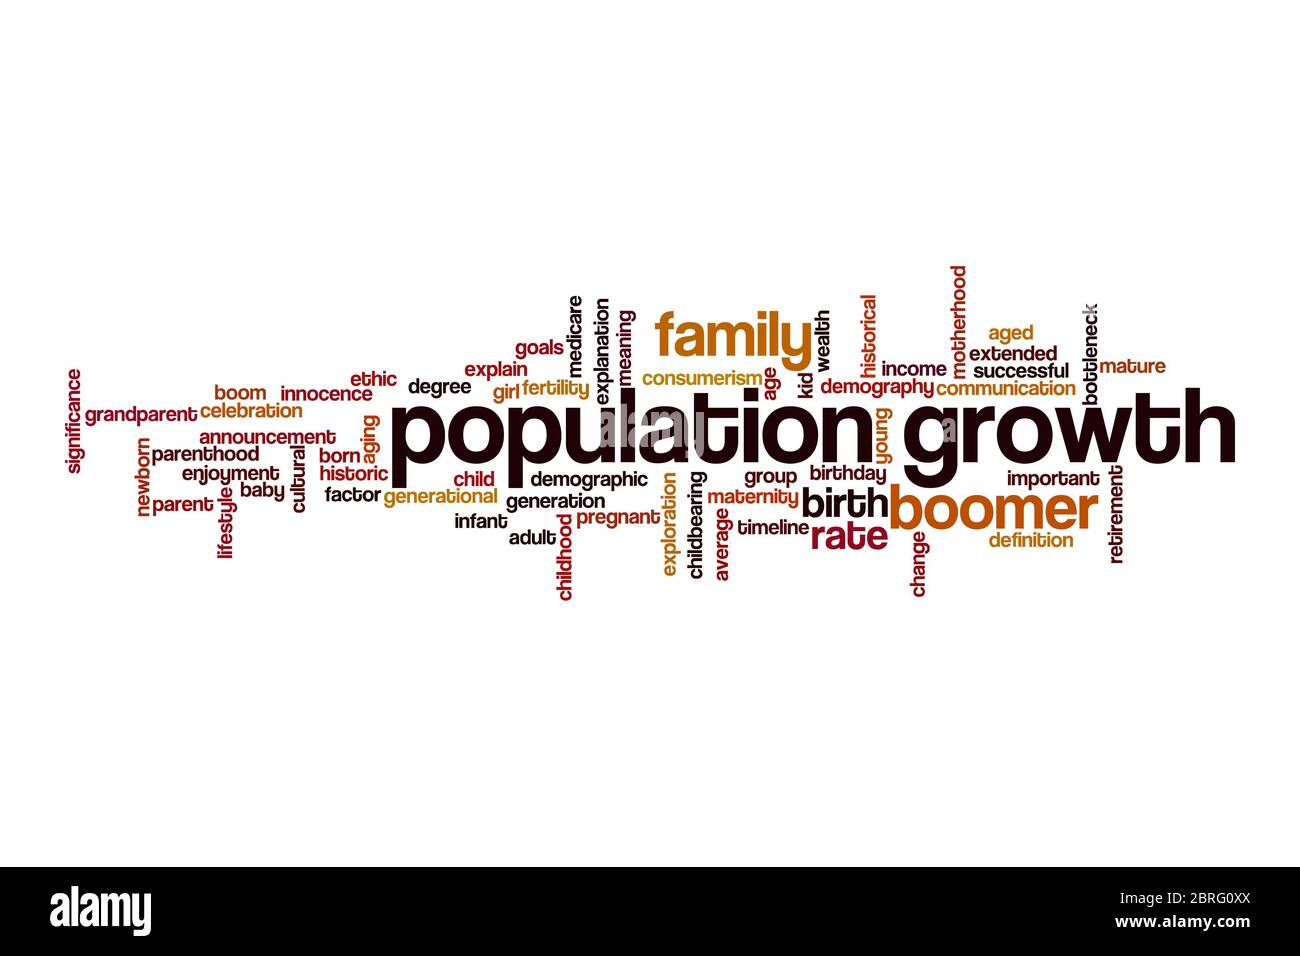 Population growth cloud concept on white background Stock Photo